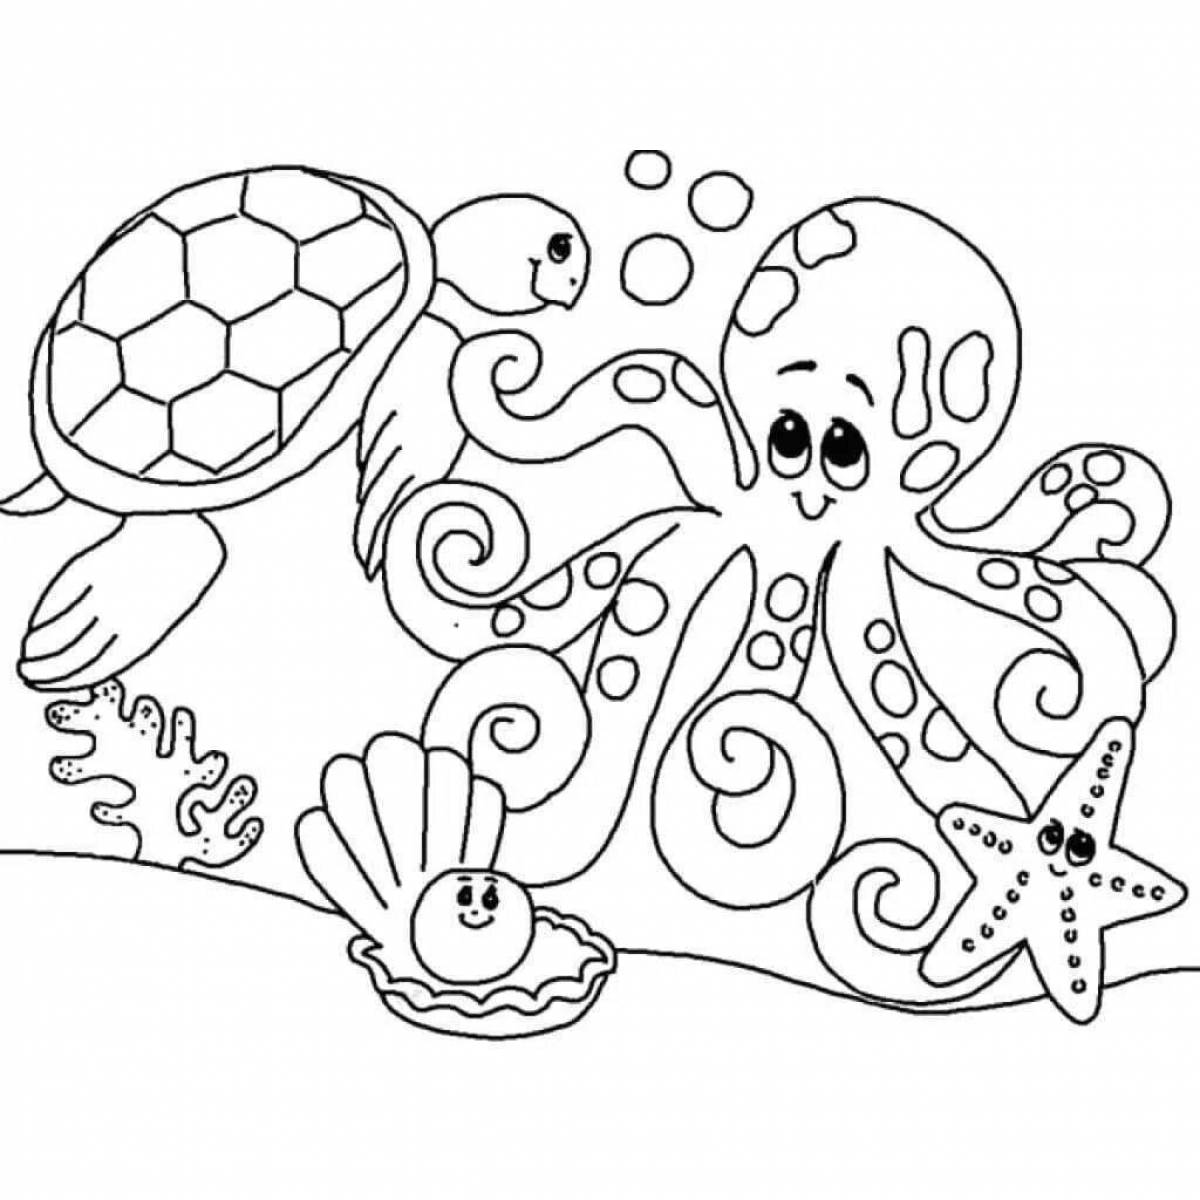 Amazing sea animals coloring pages for kids